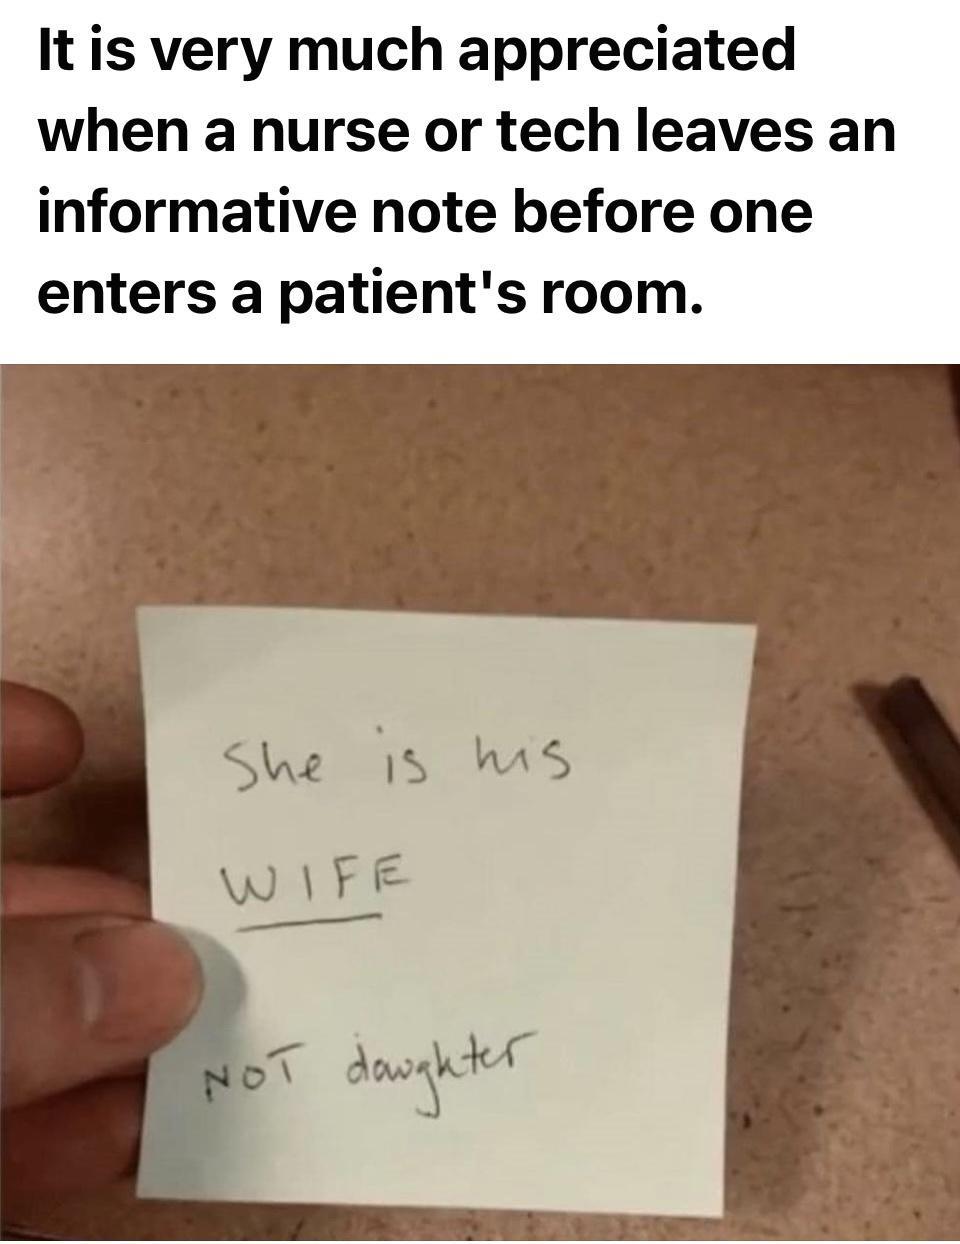 funny memes and pics - writing - It is very much appreciated when a nurse or tech leaves an informative note before one enters a patient's room. She is his Wife Not doughter